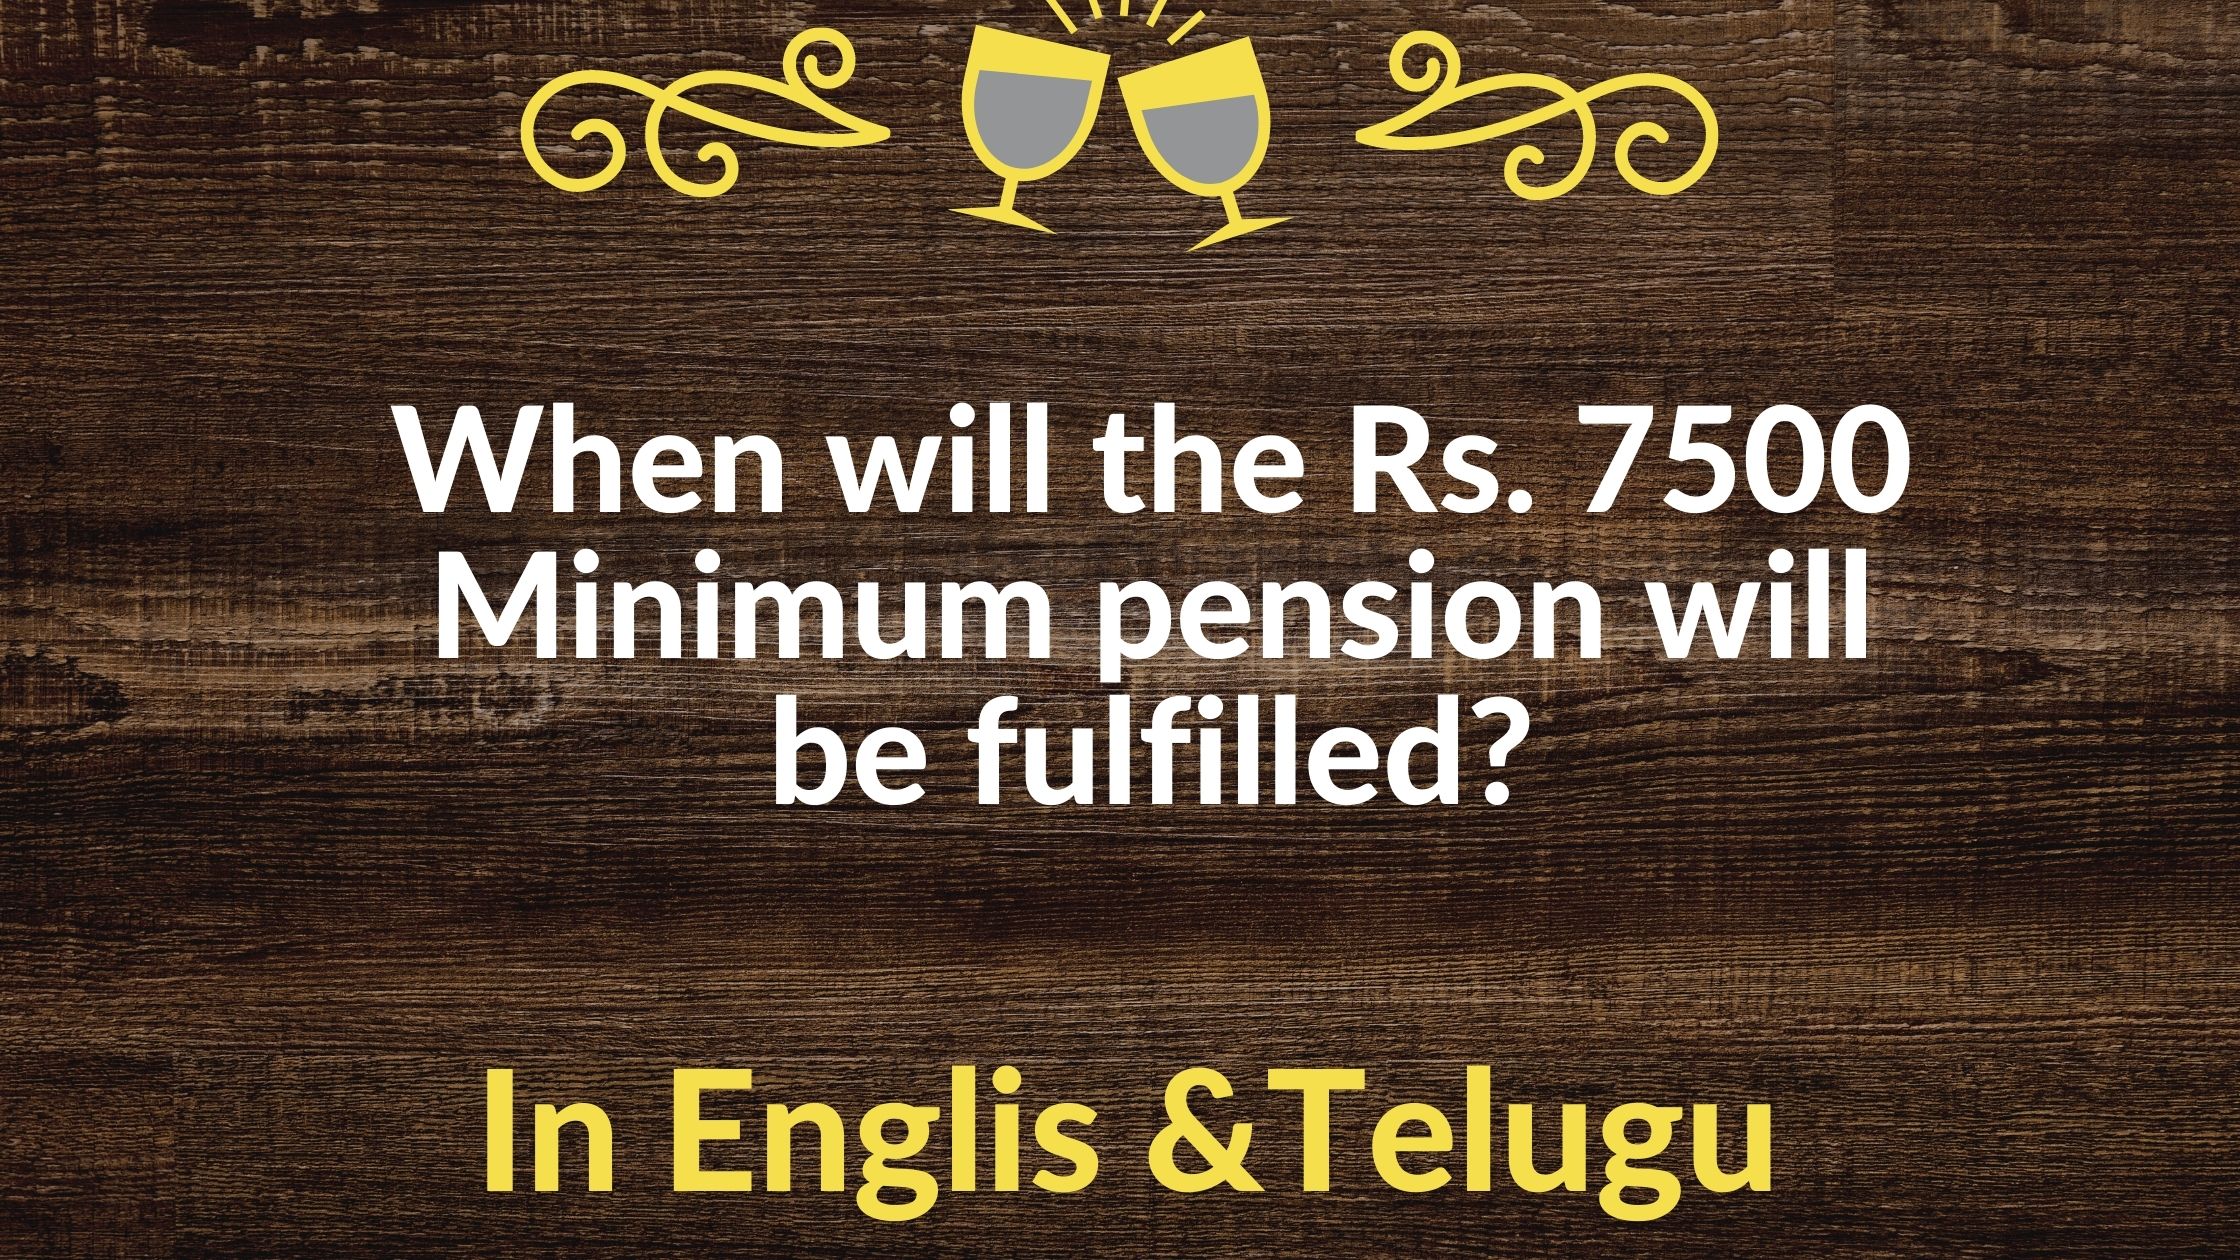 When will the Rs. 7500 Minimum pension will be fulfilled?